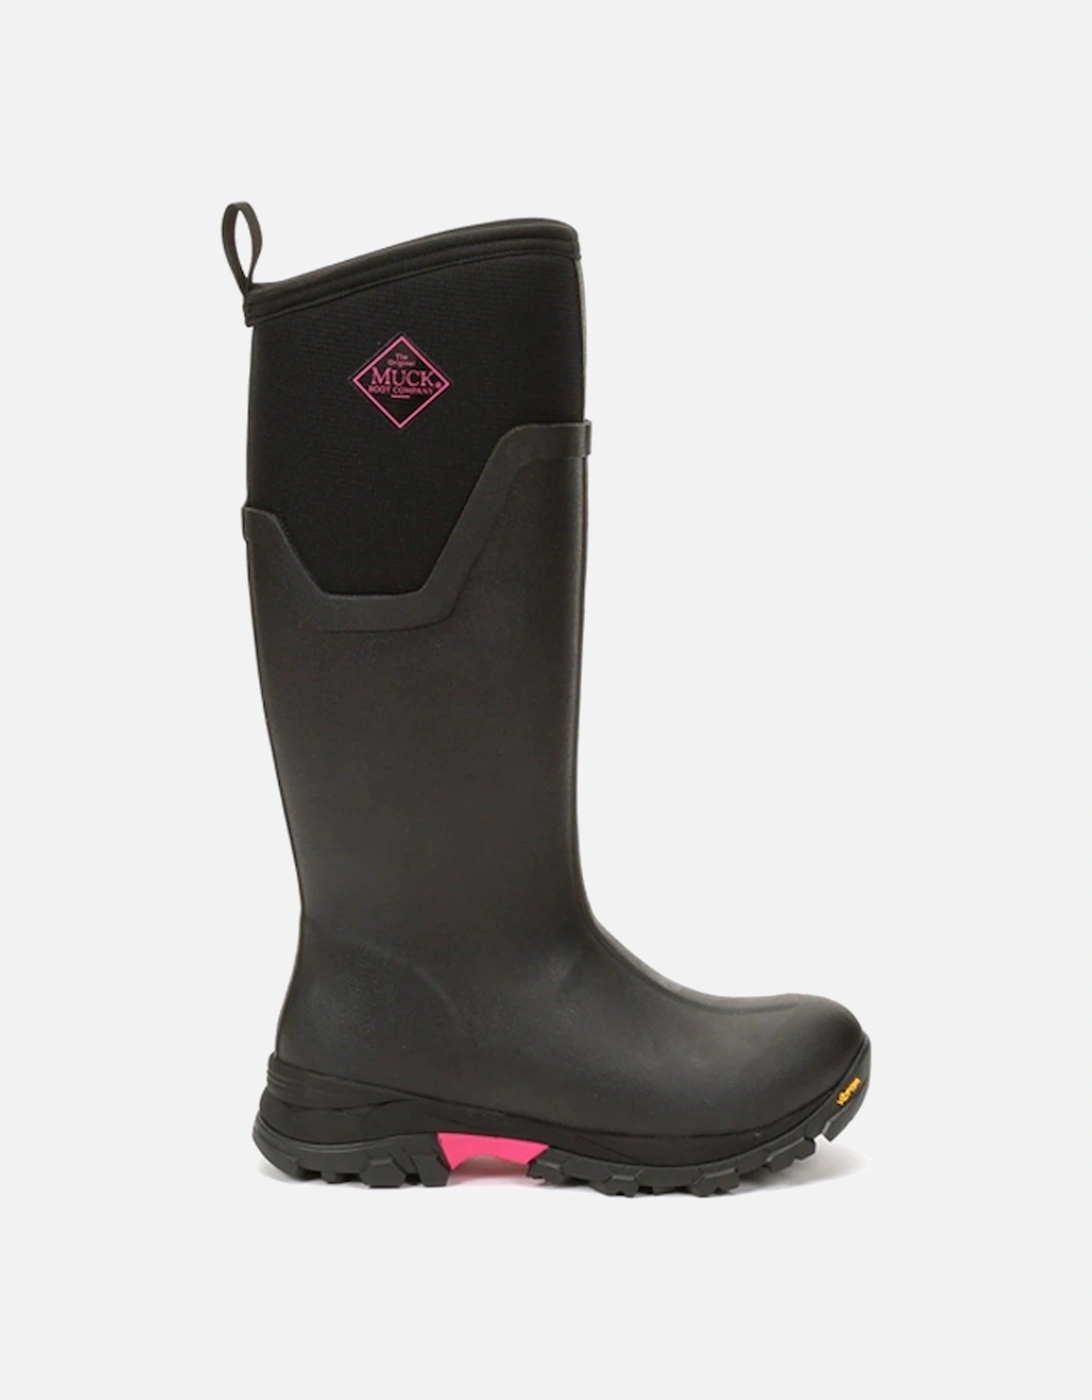 Muck Boots Women's Arctic Ice Tall Wellies Black/Hot Pink DFS, 9 of 8